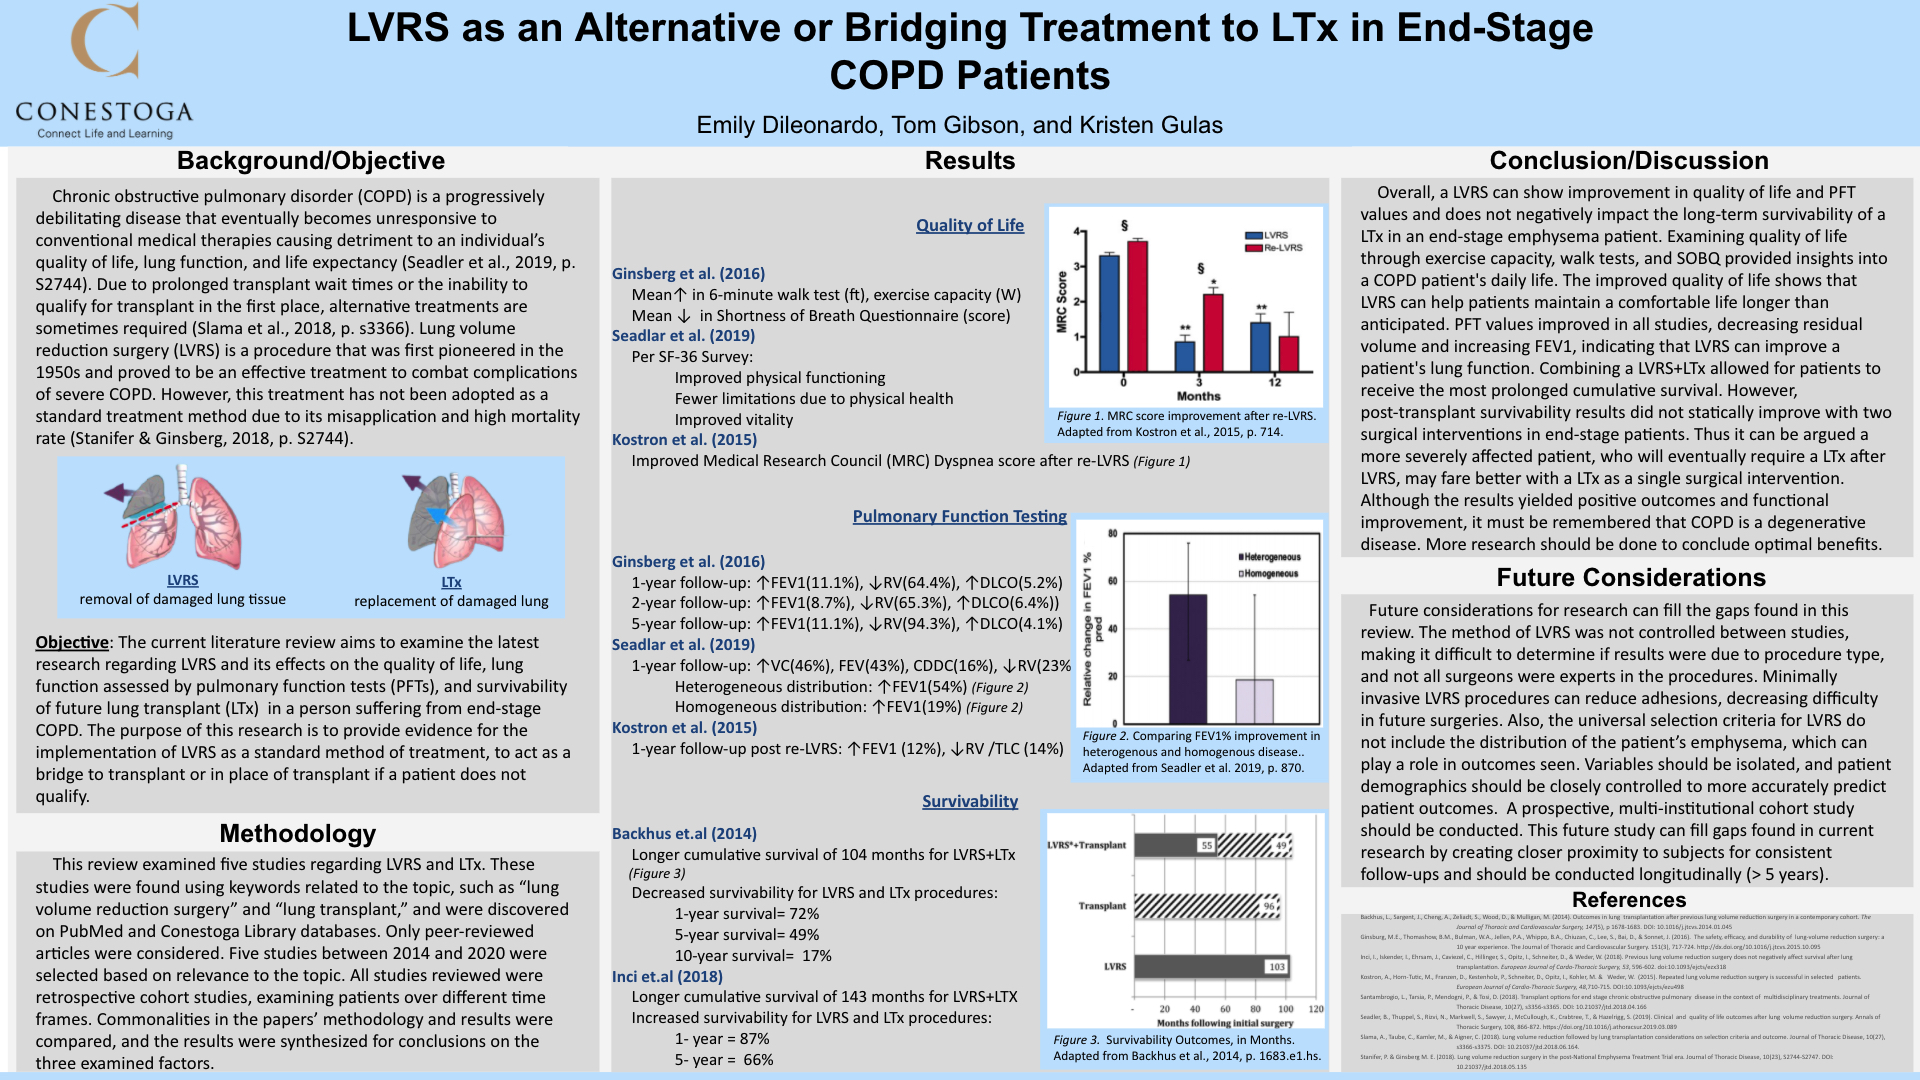 Thomas Gibson_STU_Poster_LVRS as an Alternative or Bridging Treatment to LTx in End-Stage COPD Patients